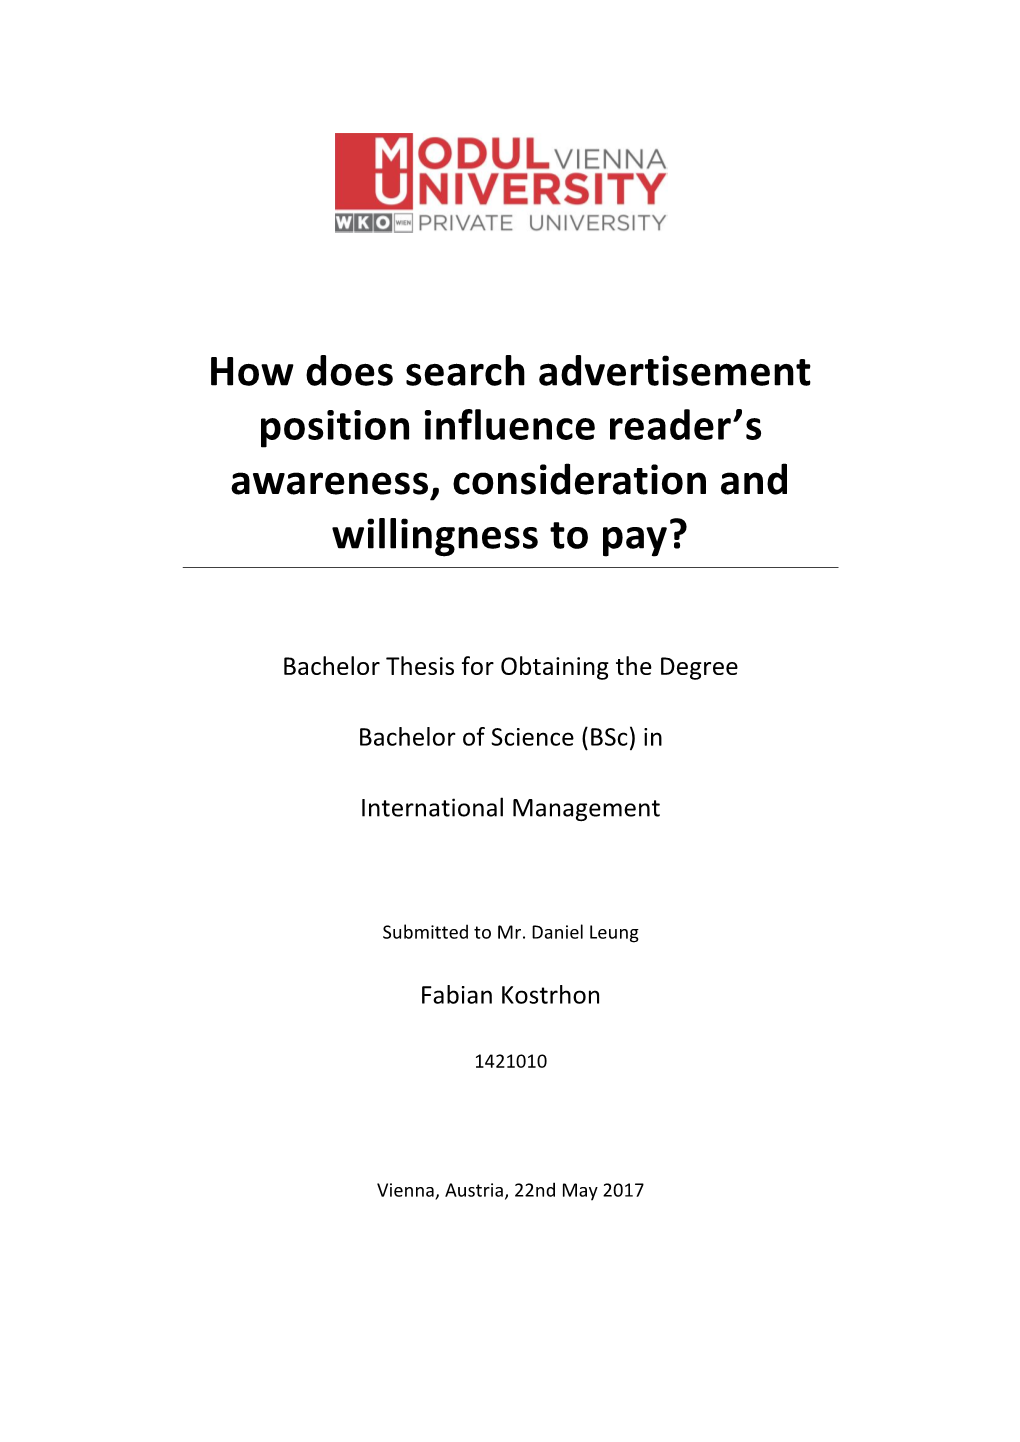 How Does Search Advertisement Position Influence Reader's